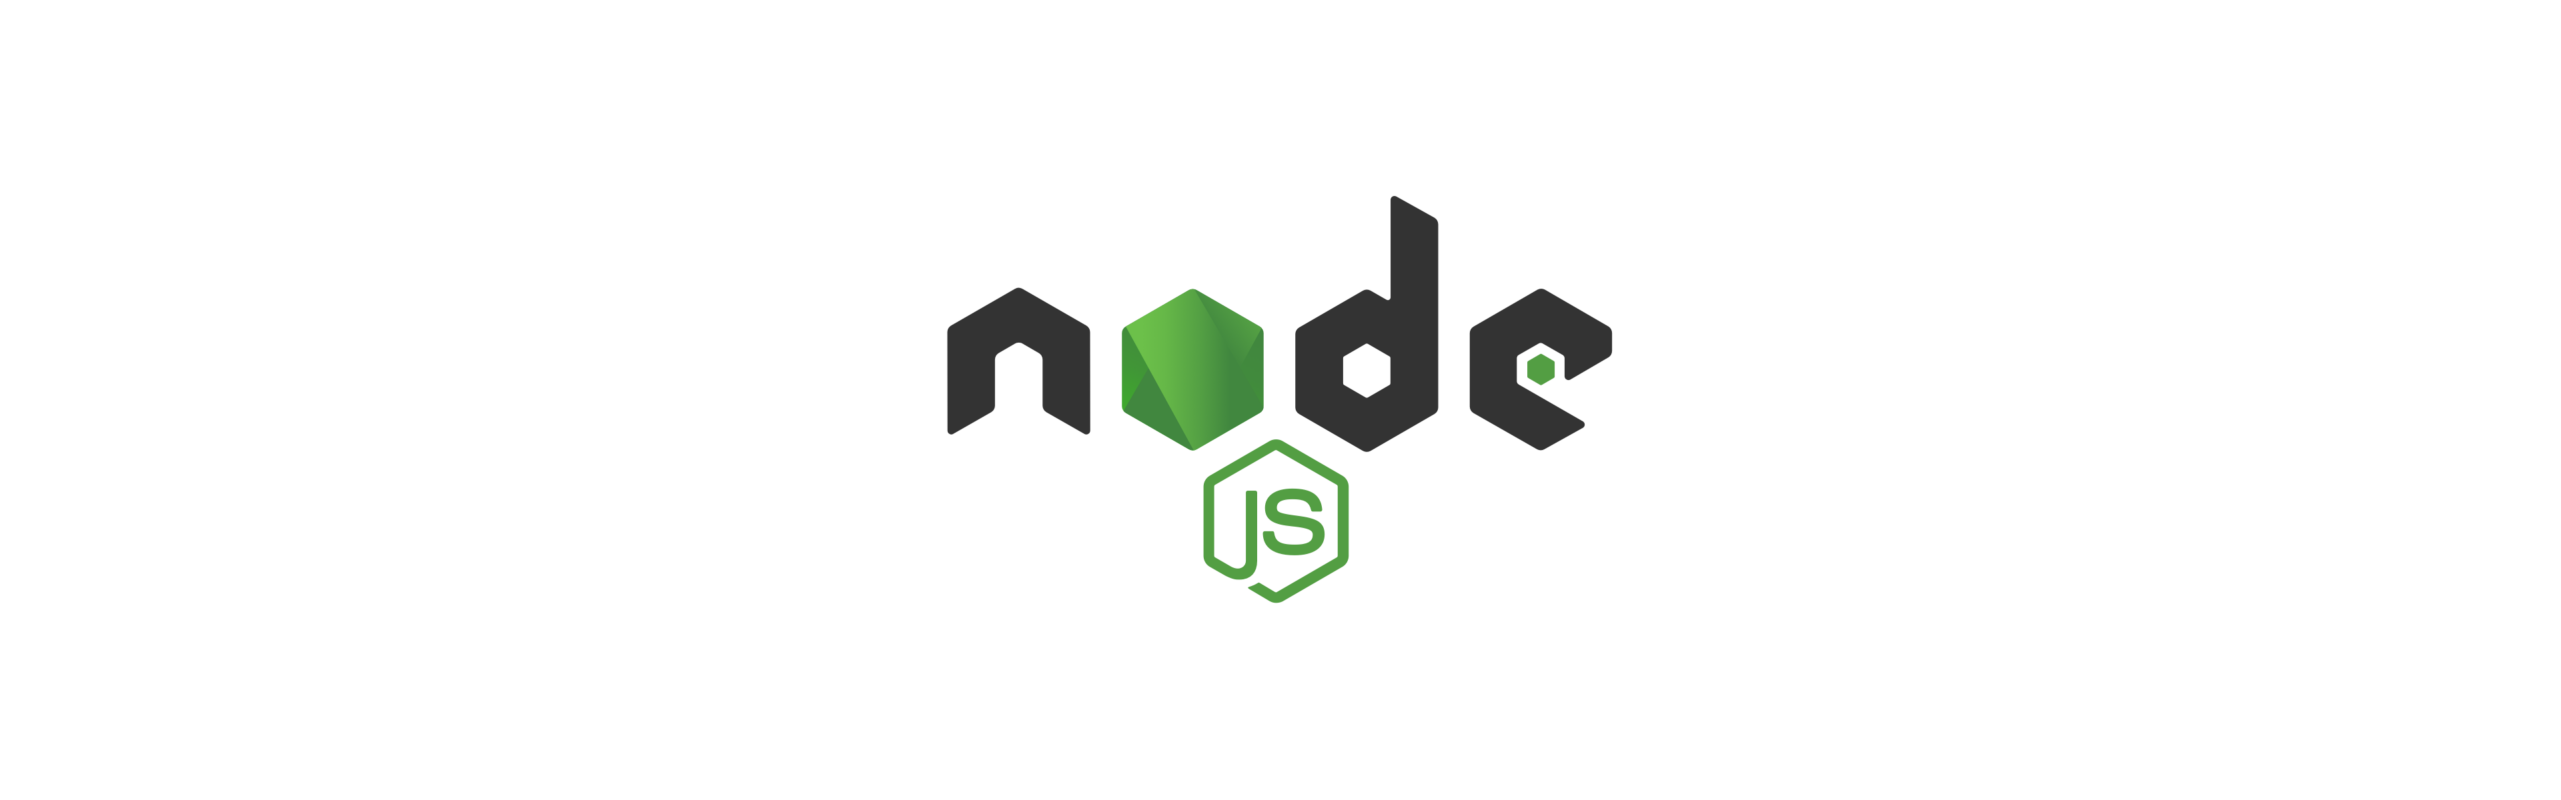 Top 8 Best Node.js frameworks for your perfect project